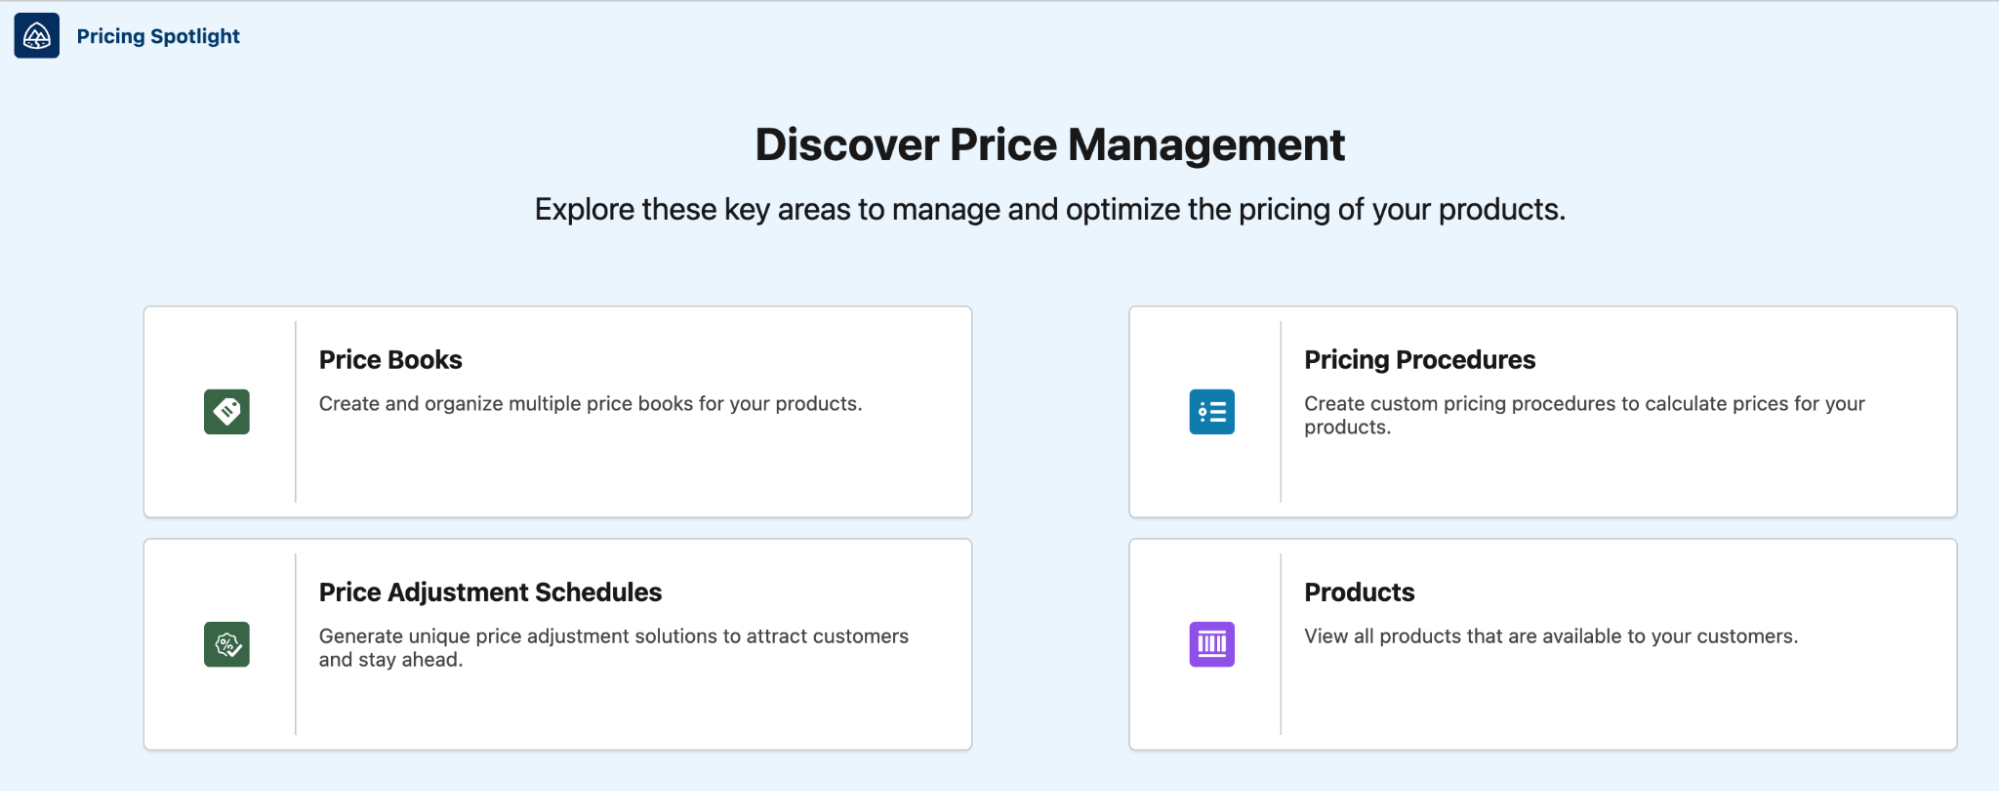 Discover Price Management